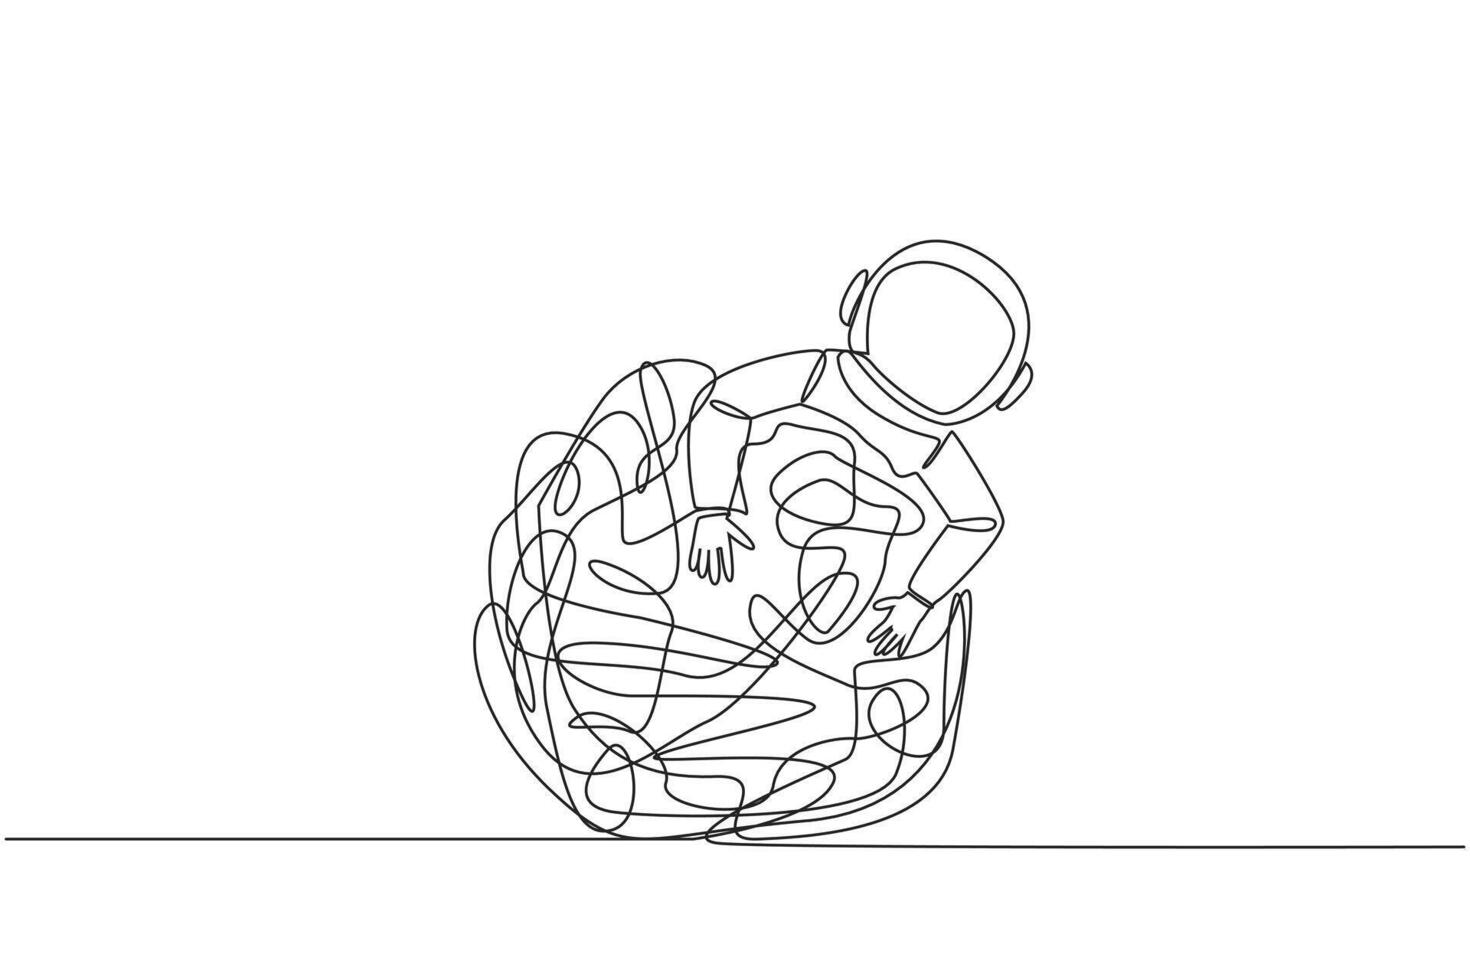 Continuous one line drawing astronaut hugging tangled circle. Trying to get rid of excess anxiety. Calm the mind for the good and smoothness of expedition. Single line draw design vector illustration